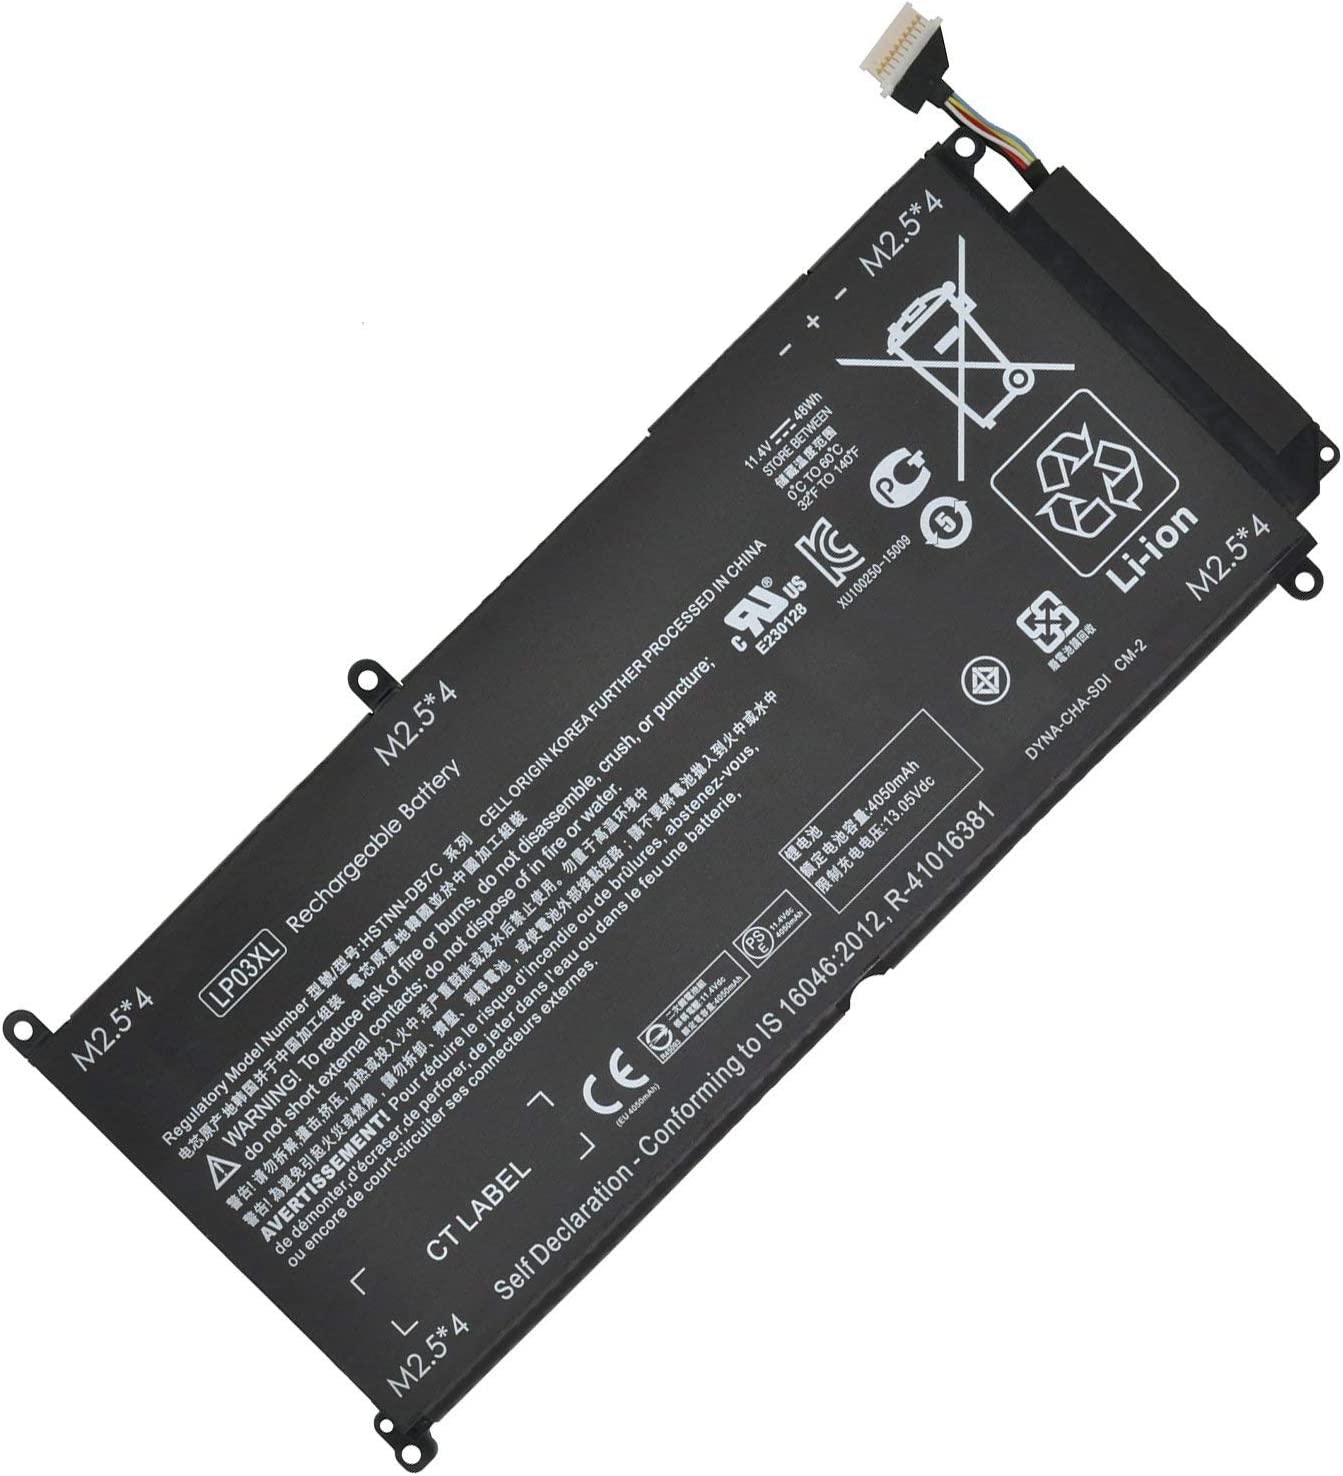 Batterie pour HP LP03XL HSTNN-DB7C Envy M6-P M6-P113DX M6-P 013DX 15T-AE 15T-AE000(compatible)